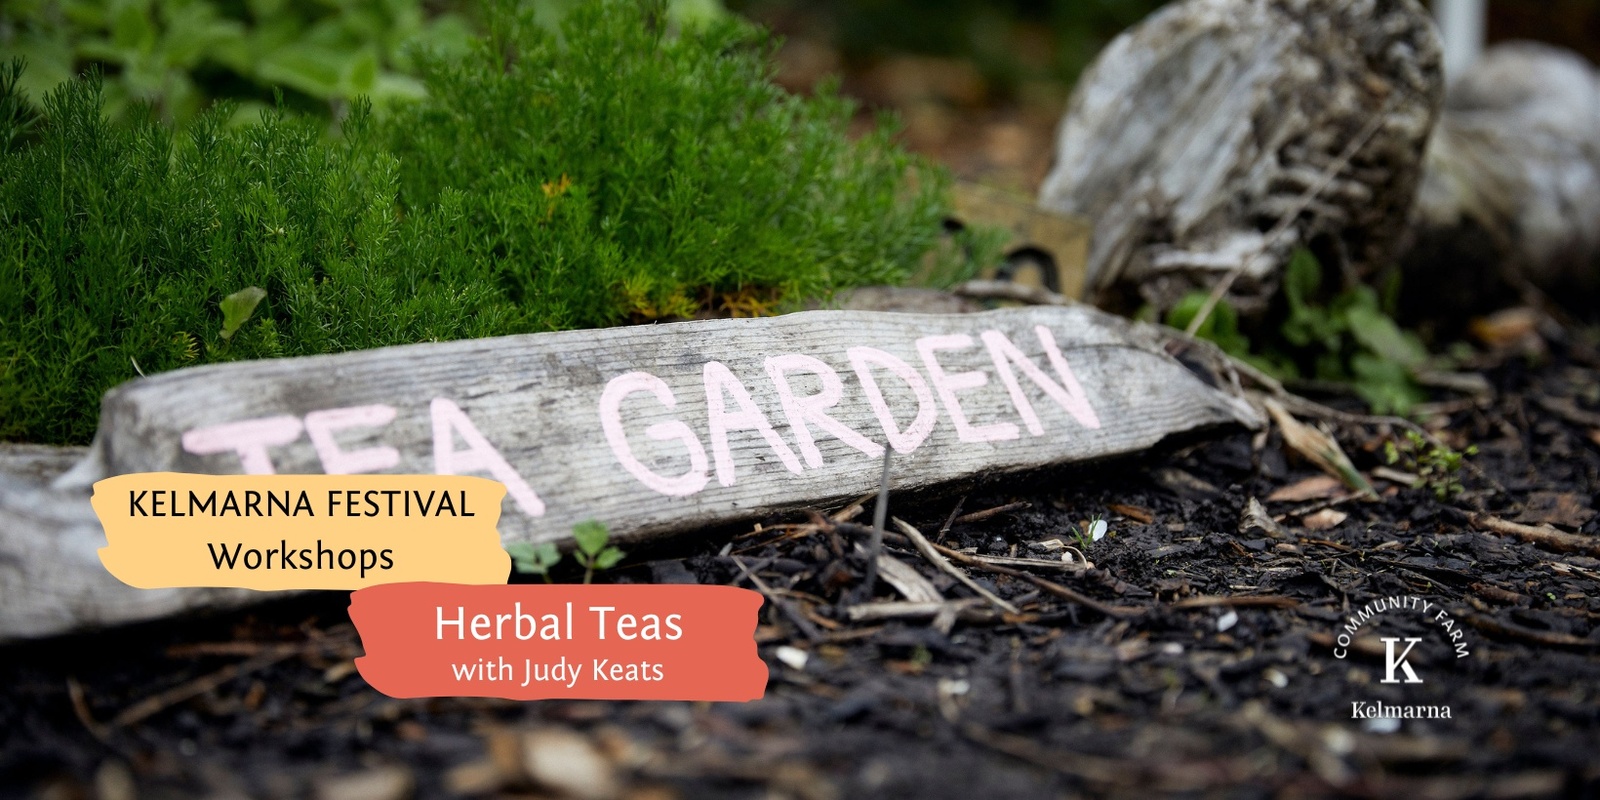 Banner image for Herbal Teas at Kelmarna Festival with Judy Keats